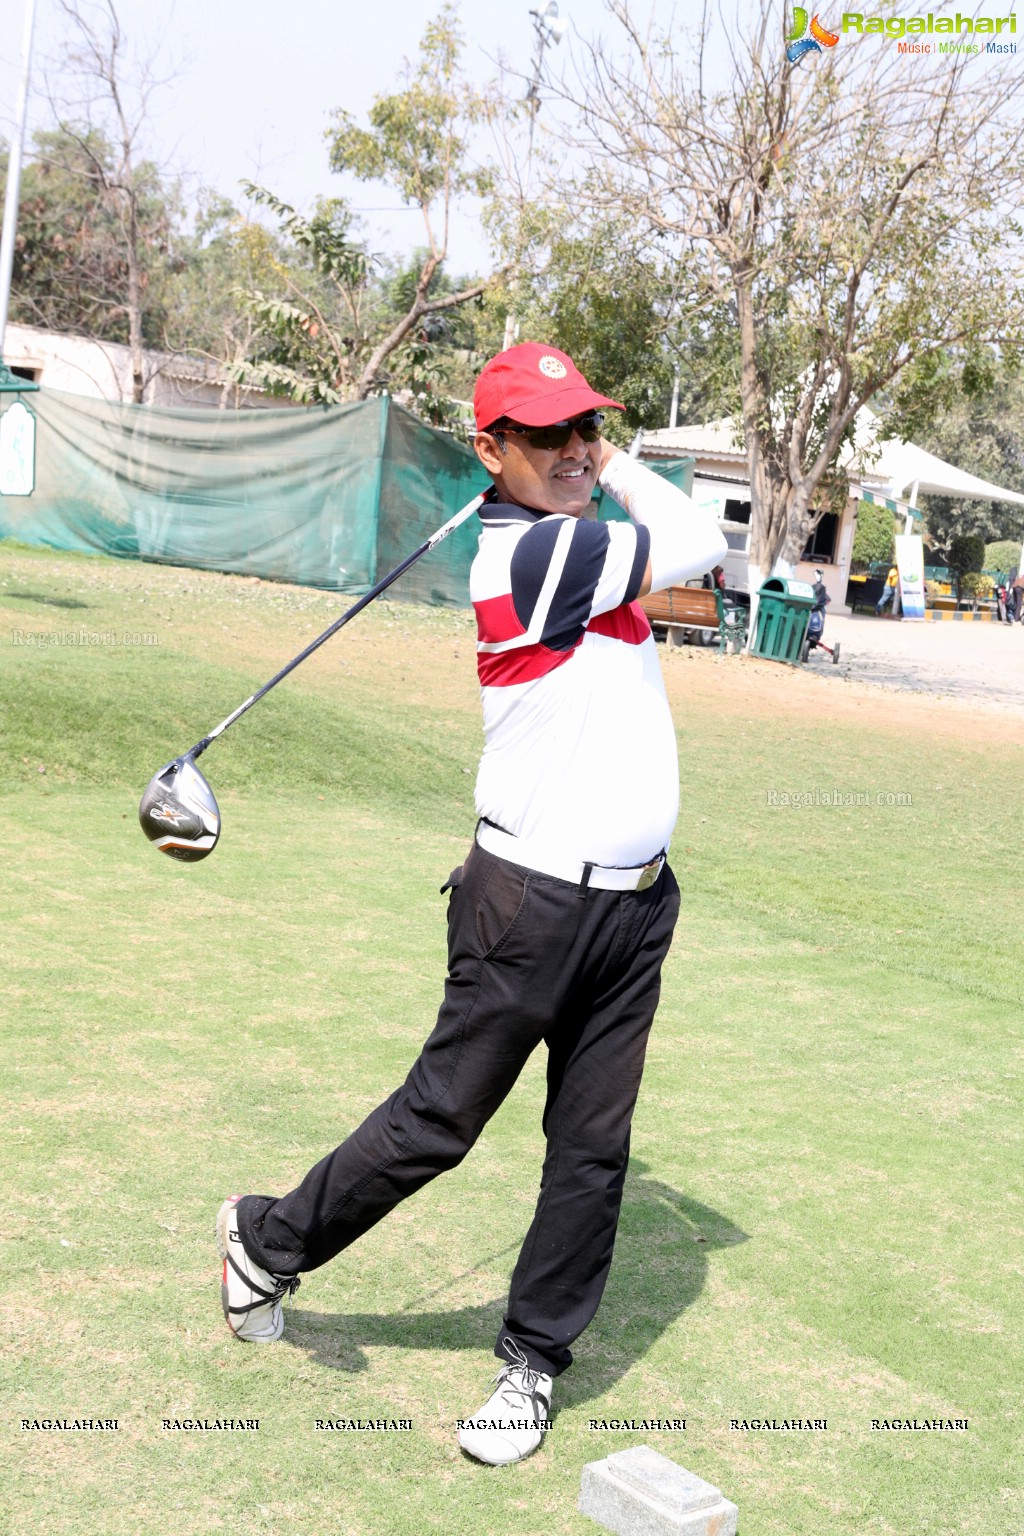 Golf Fund Raising Tournament and Prize Distribution Function by Rotary Club of Hyderabad Deccan at Hyderabad Golf Club